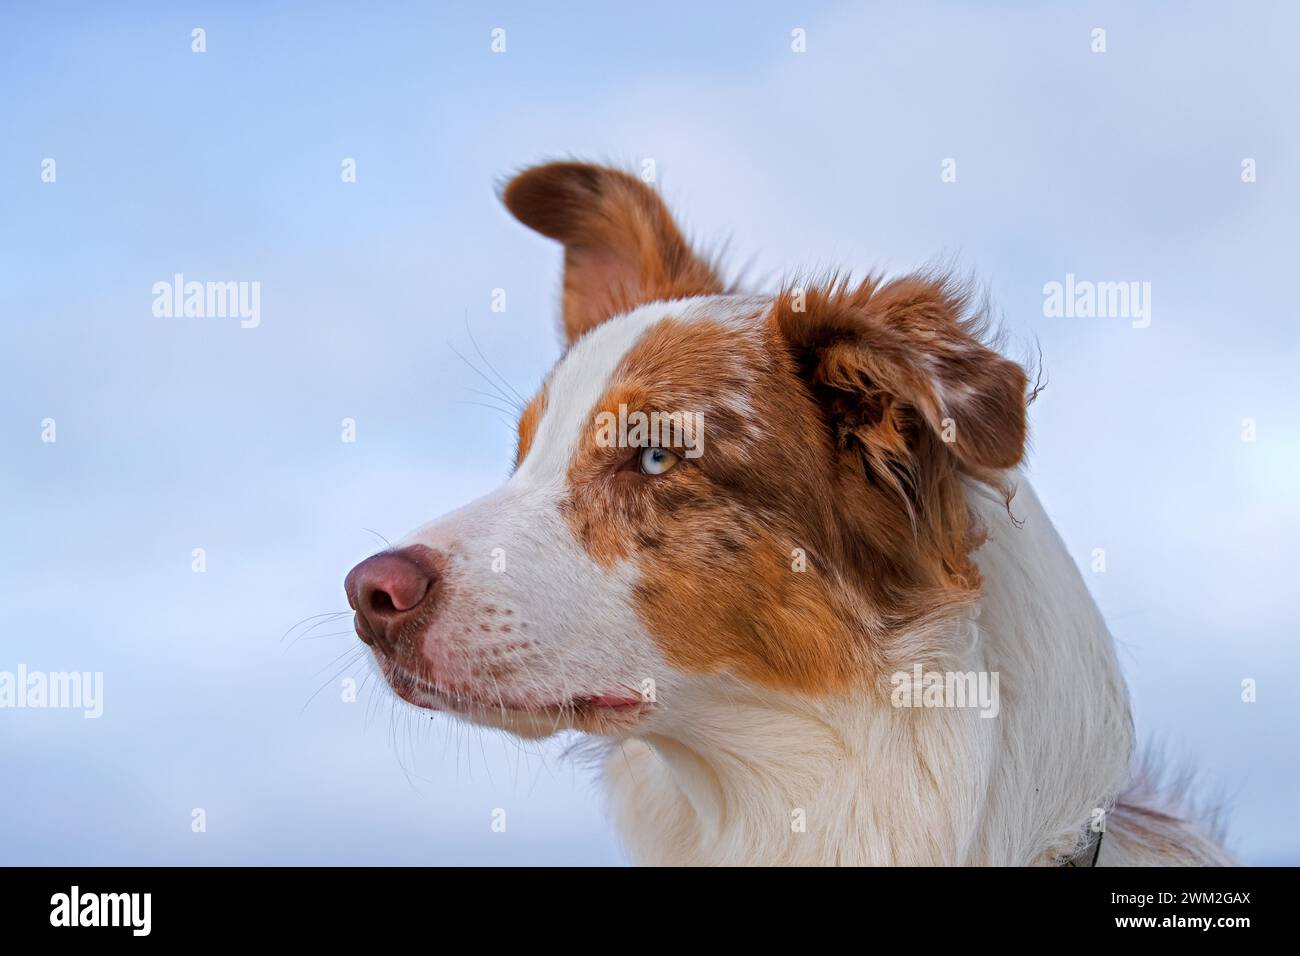 Australian Shepherd / Aussie, breed of herding dog from the United States, close-up portrait Stock Photo